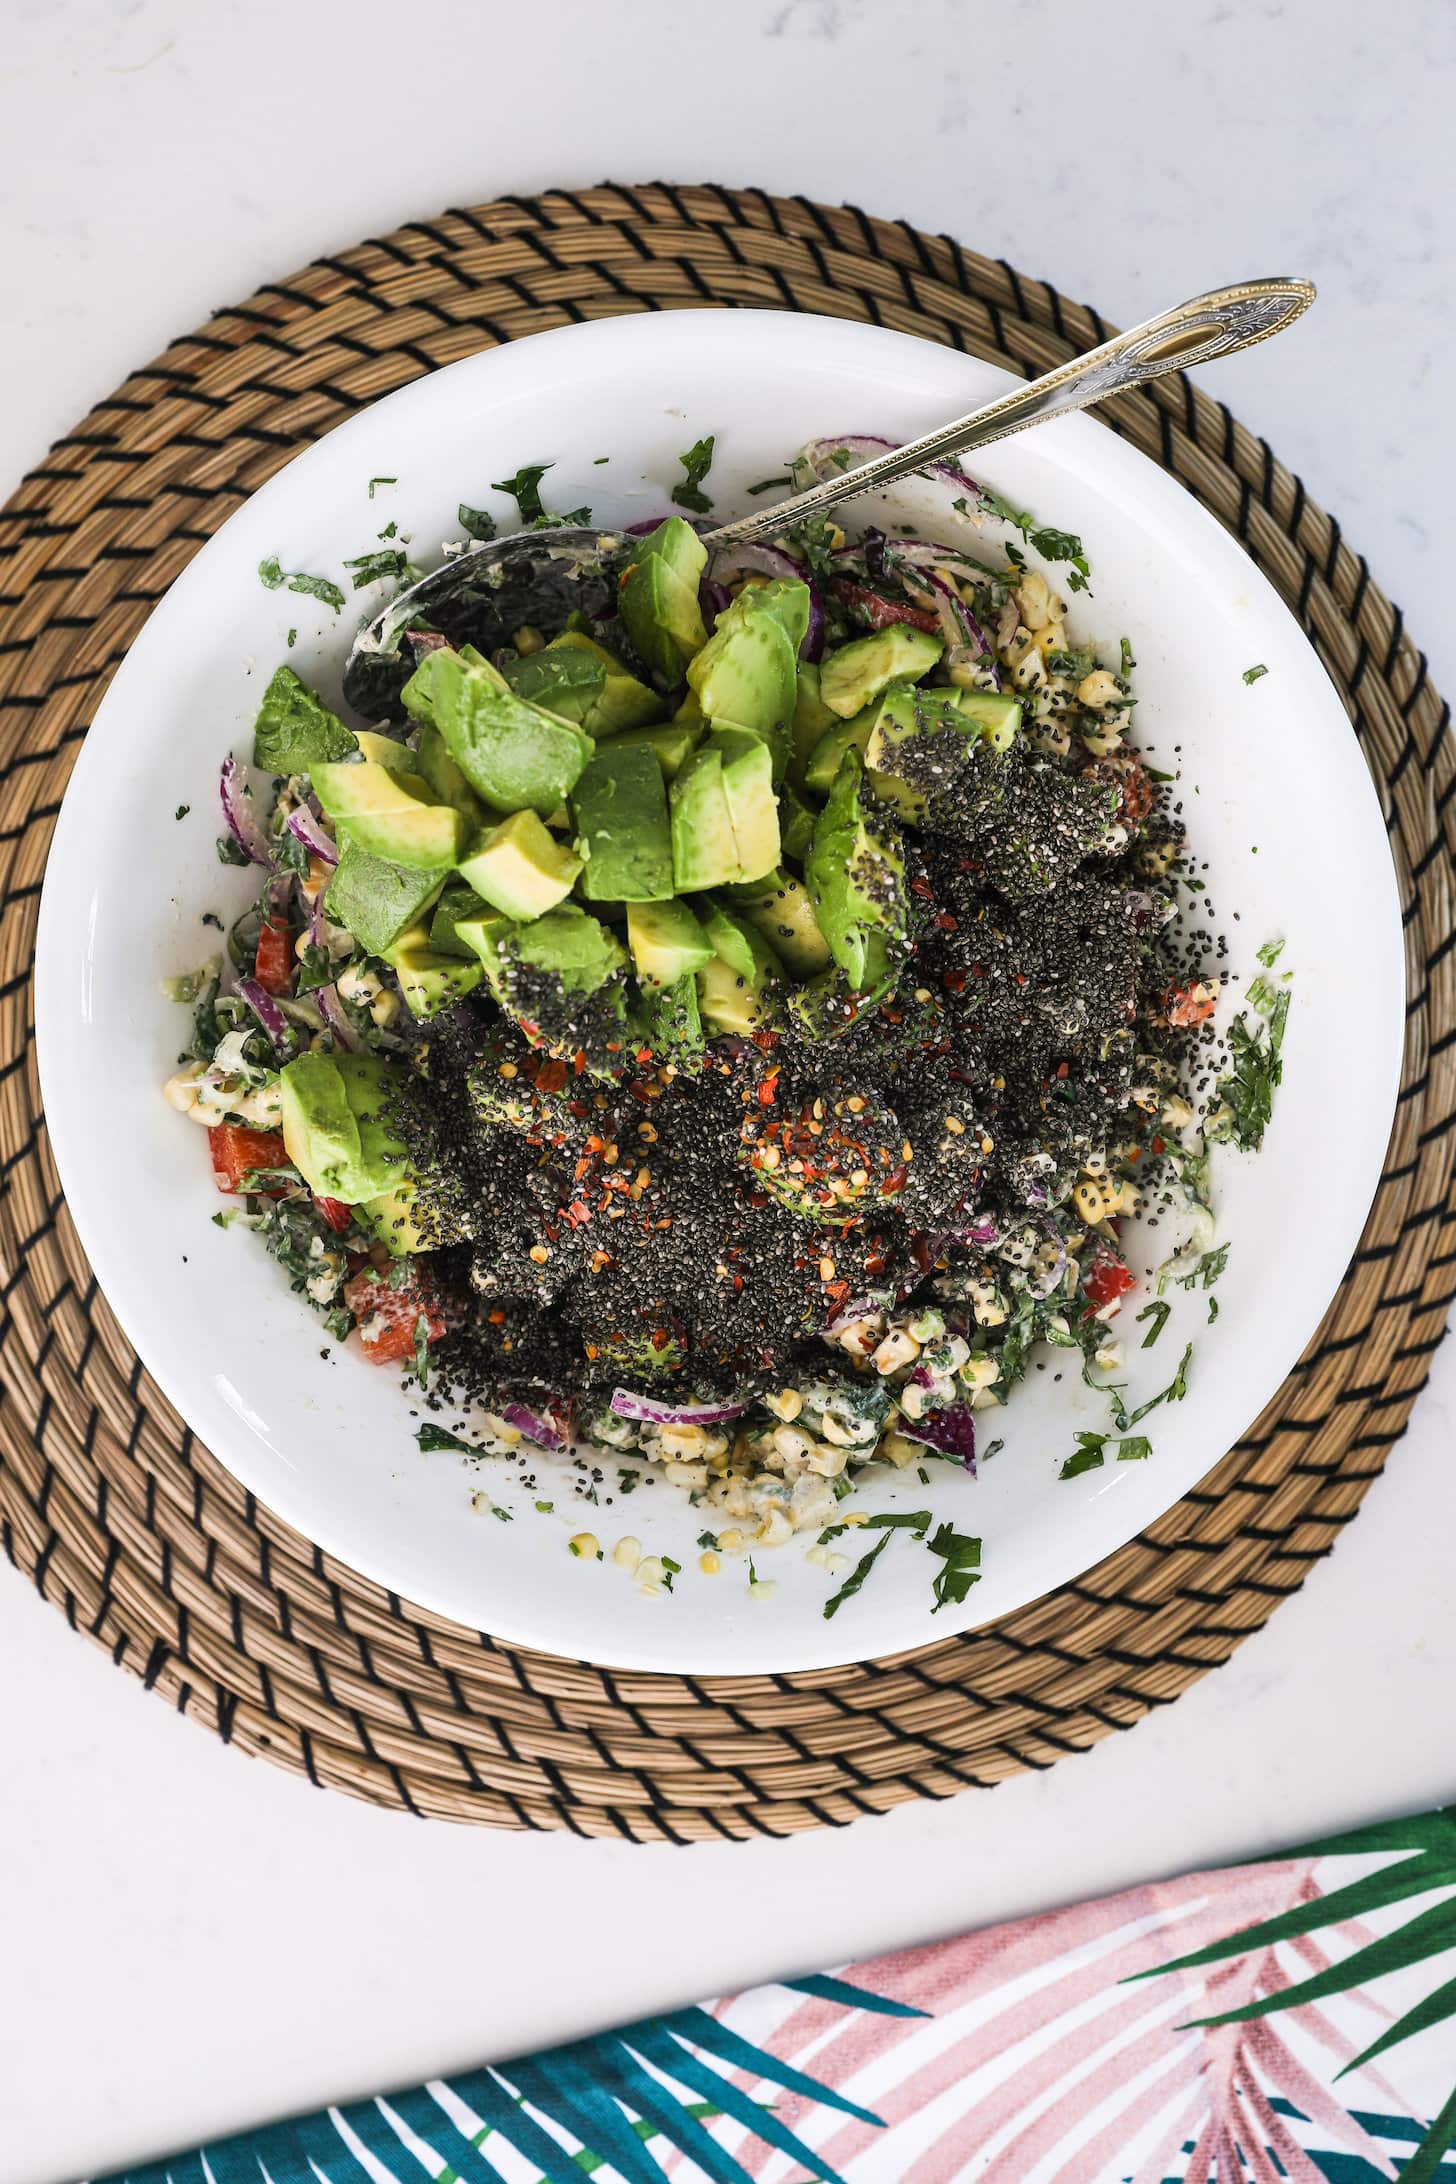 Overhead image of a bowl with avocado chunks, chia seeds and other chopped food ingredients that cannot be seen.